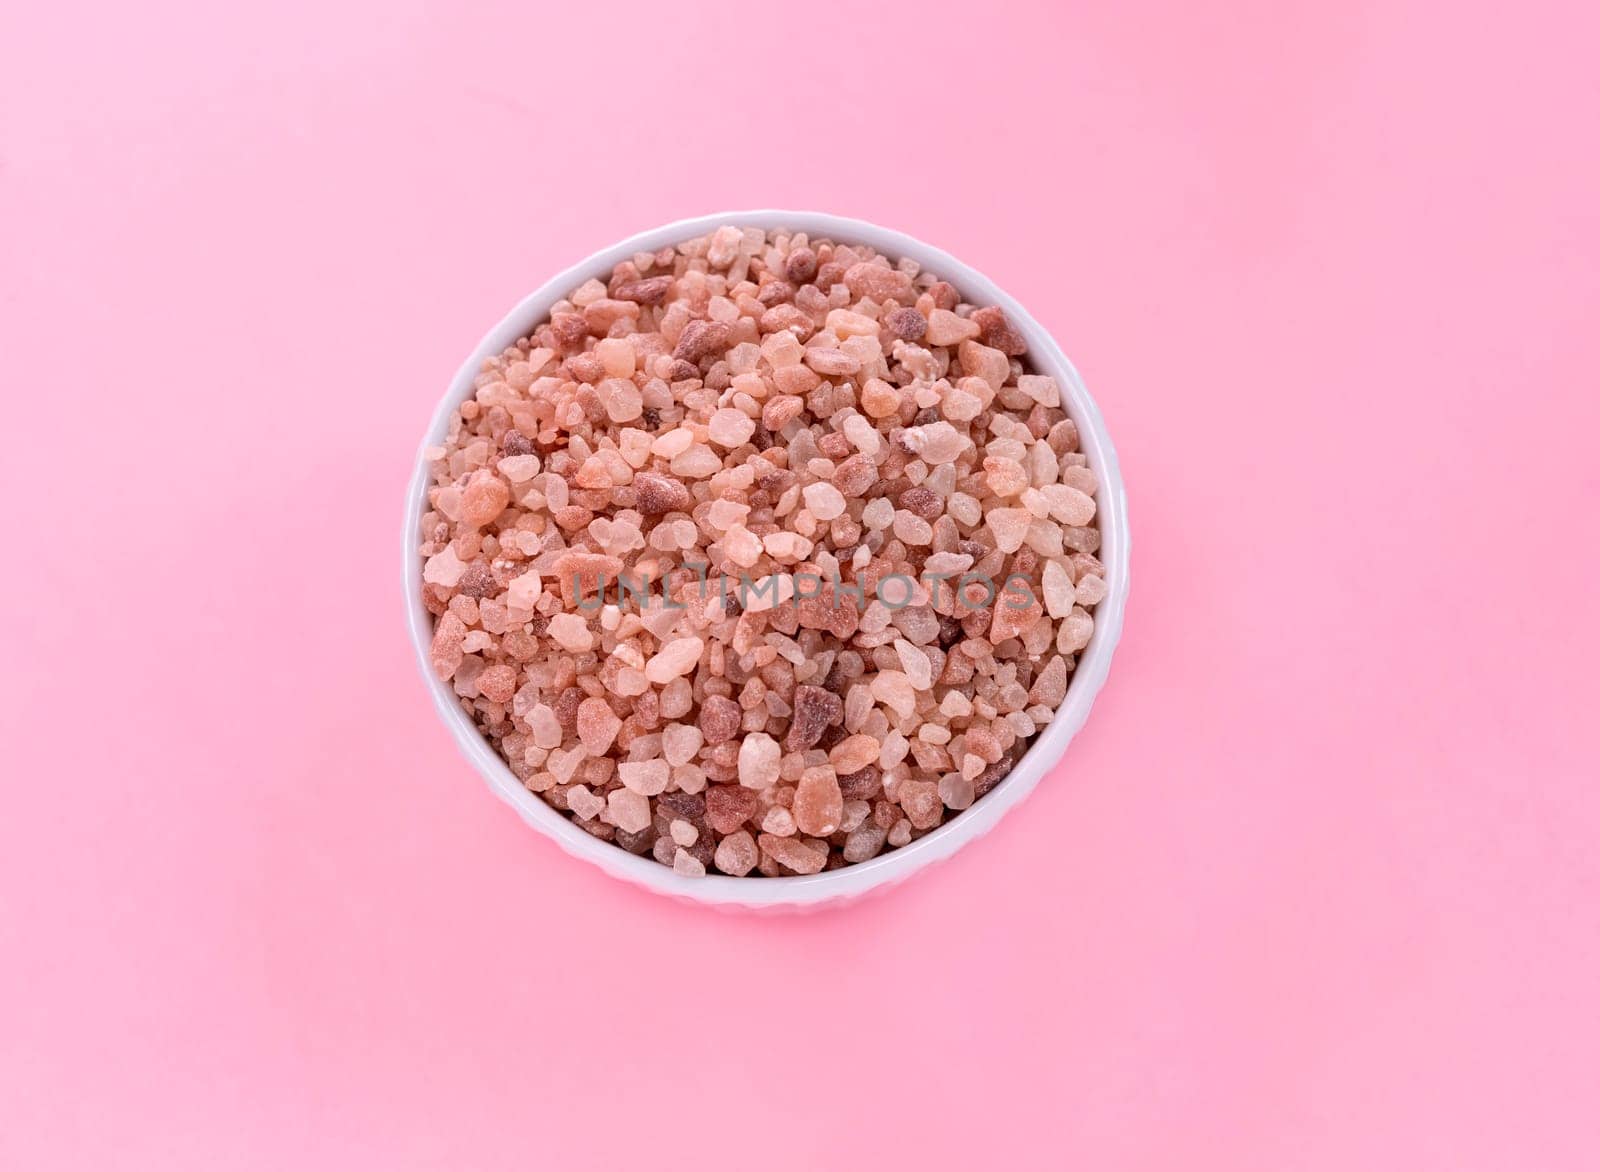 Flatly Pink Himalayan Rock Salt, Halite In White Ceramic Bowl On Pink Background. Top View Horizontal Plane, Copy Space For Text. High quality photo by netatsi